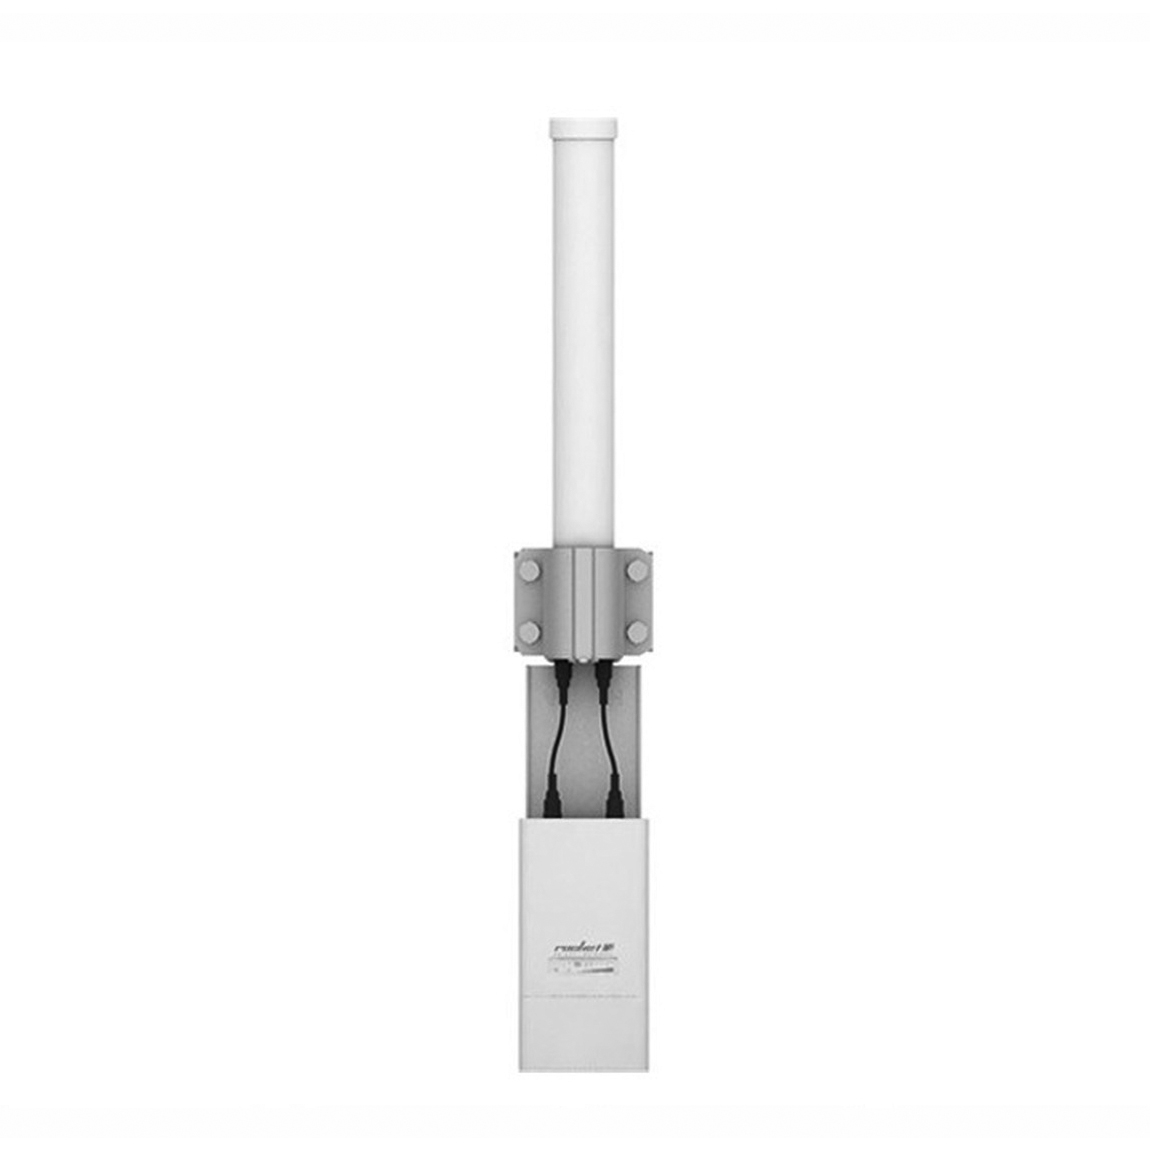 Ubiquiti 5GHz AirMax Dual Omni Directional 10dBi Antenna - All Mounting Accessories & Brackets Included,  Incl 2Yr Warr